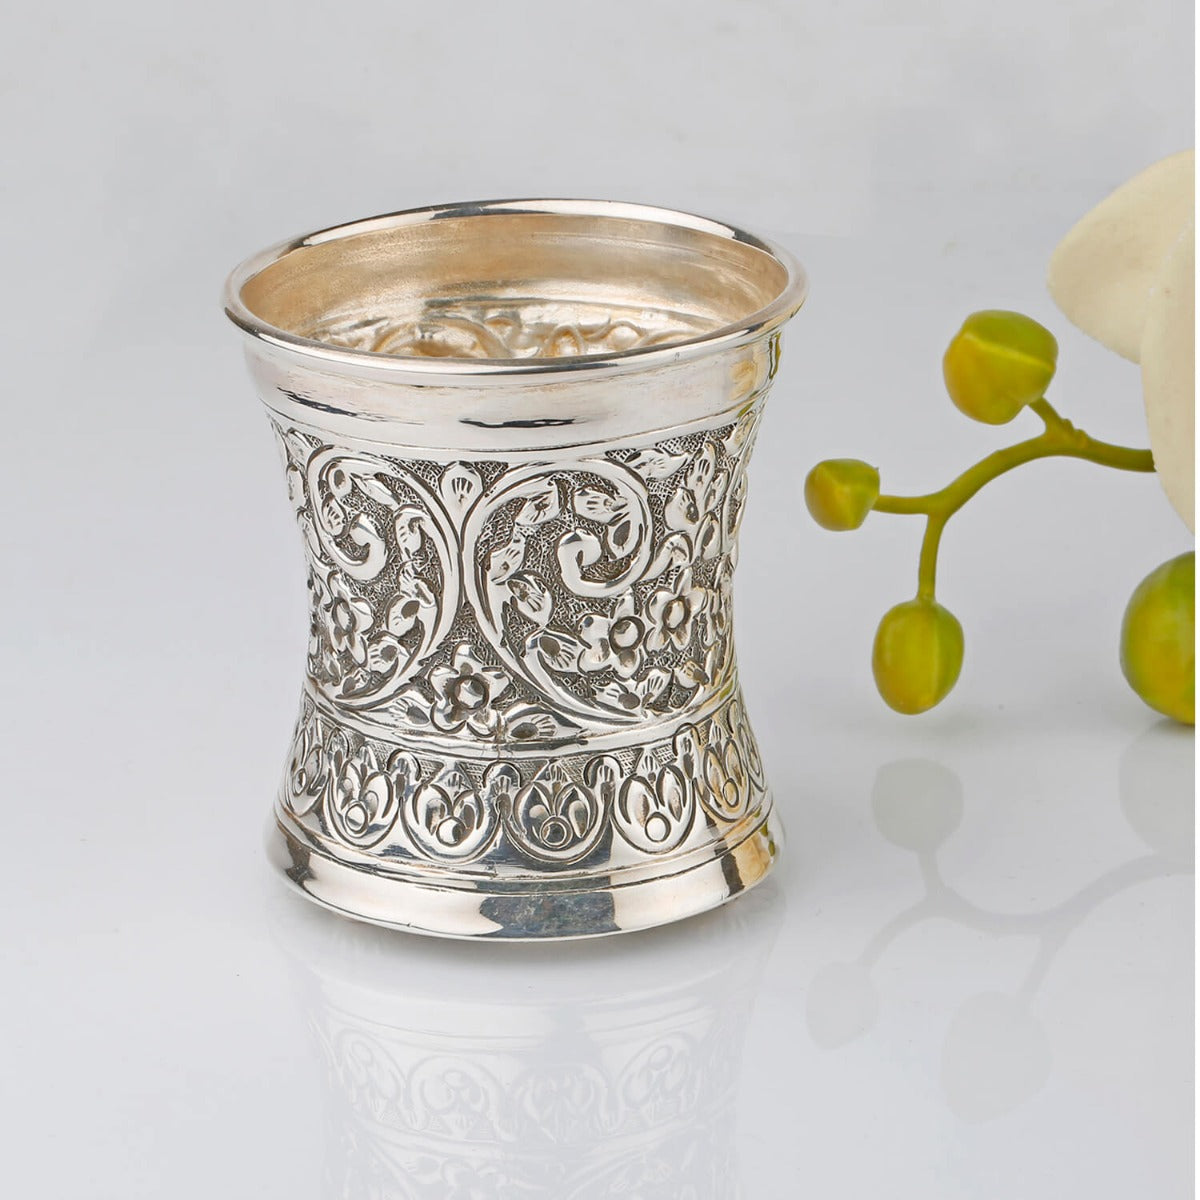 Beautifully handcrafted sterling silver glass